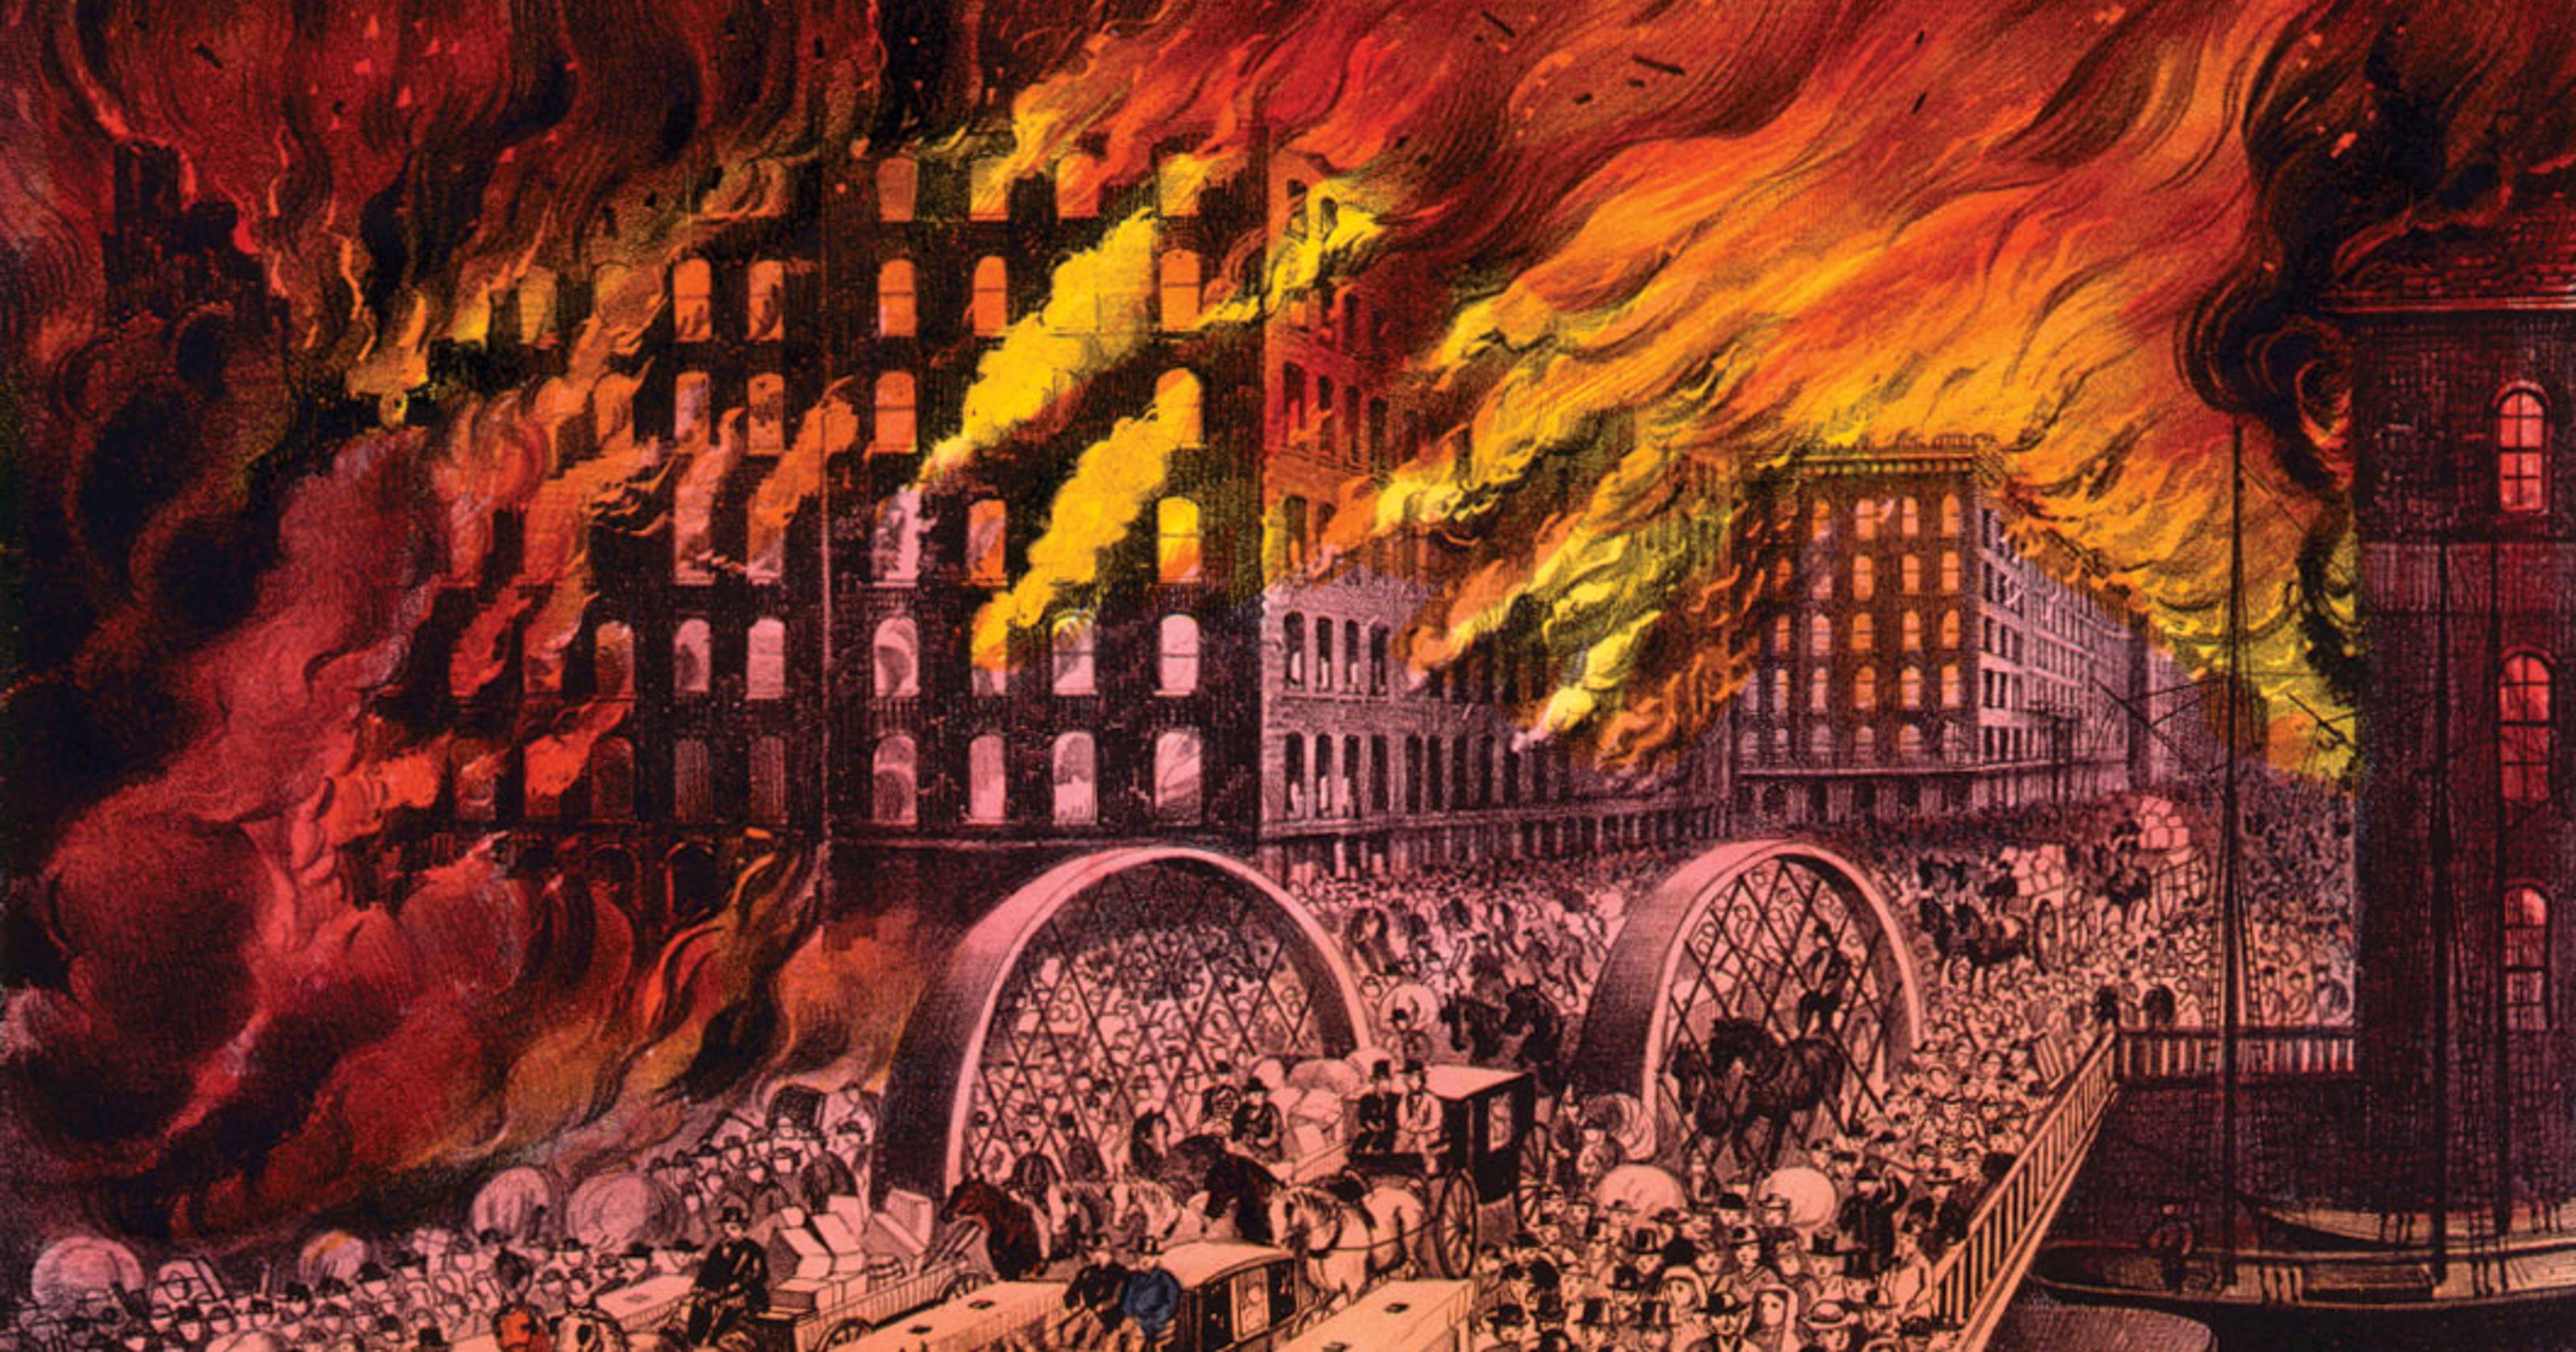 an informative essay on the great chicago fire